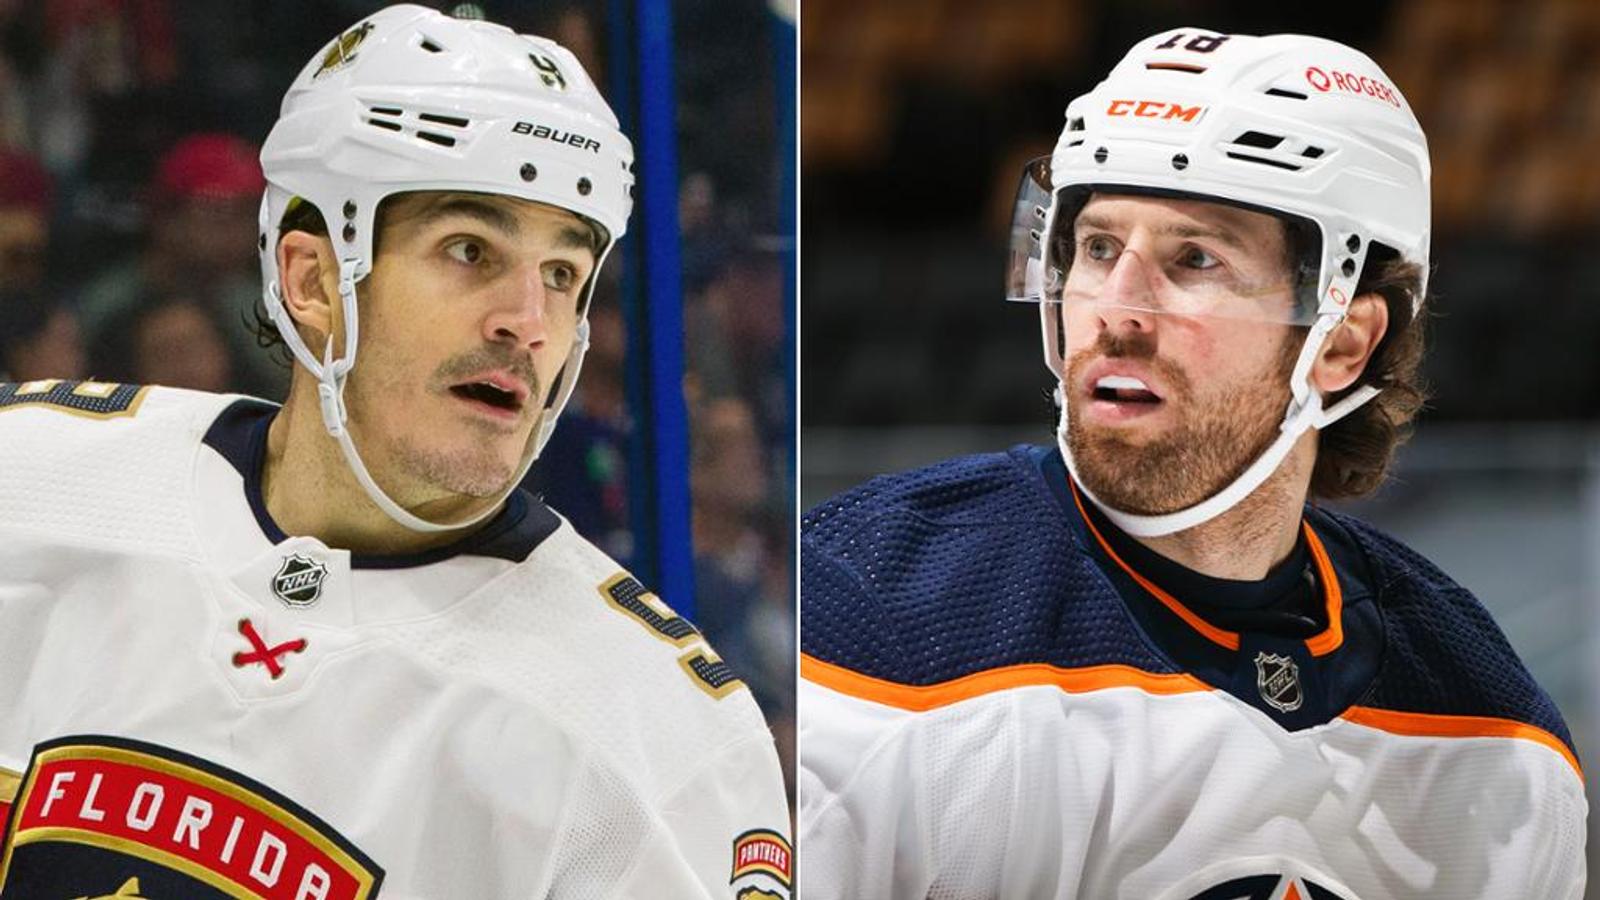 28 veterans attend training camps on PTO: who gets a deal? 